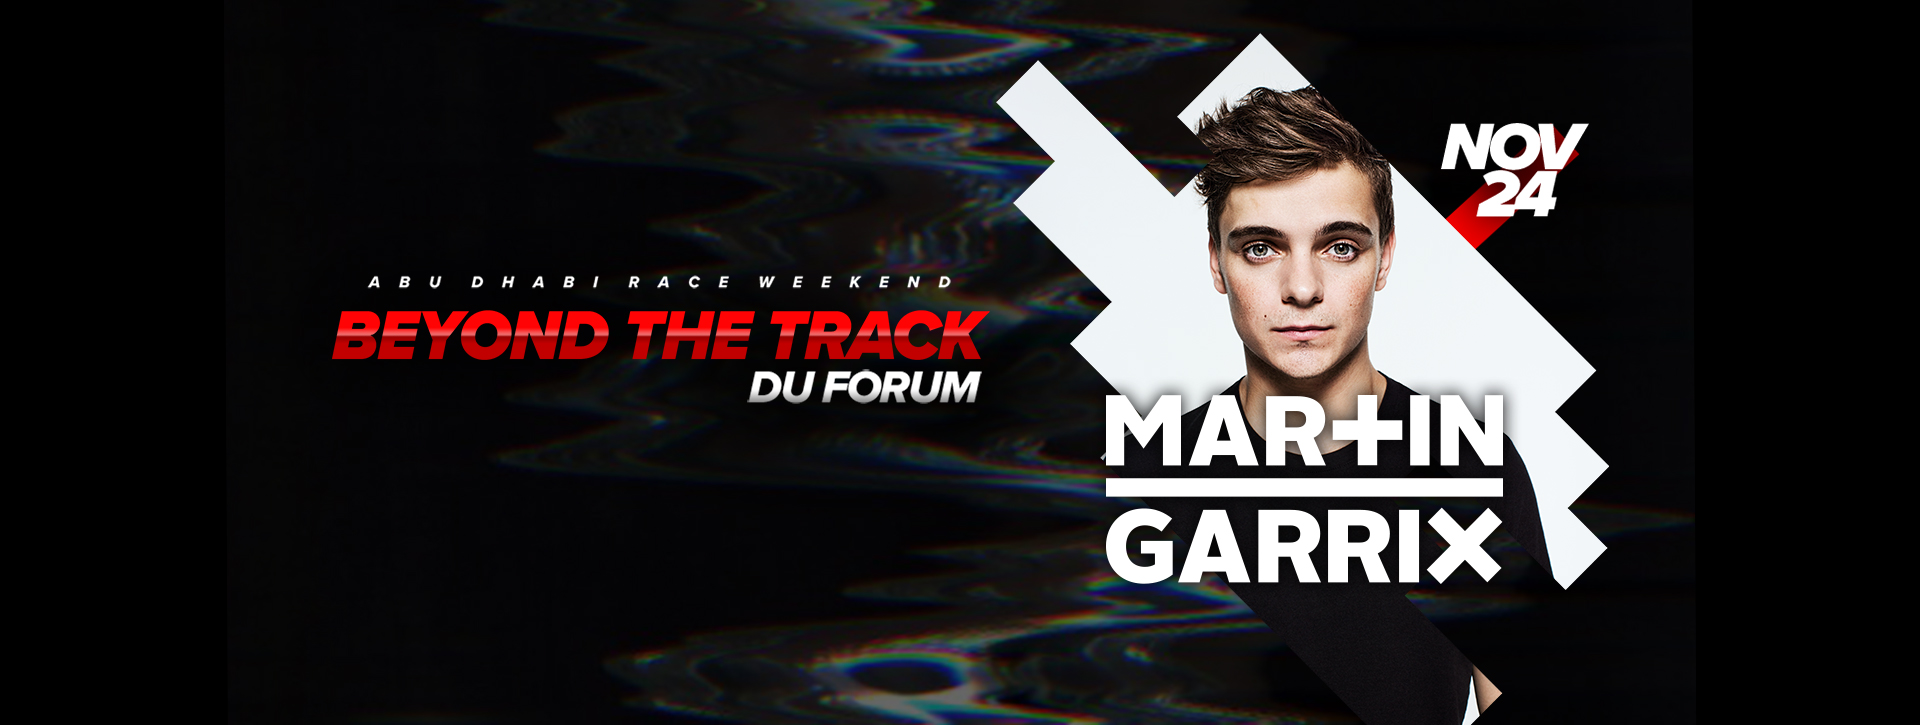 BEYOND THE TRACK WITH MARTIN GARRIX